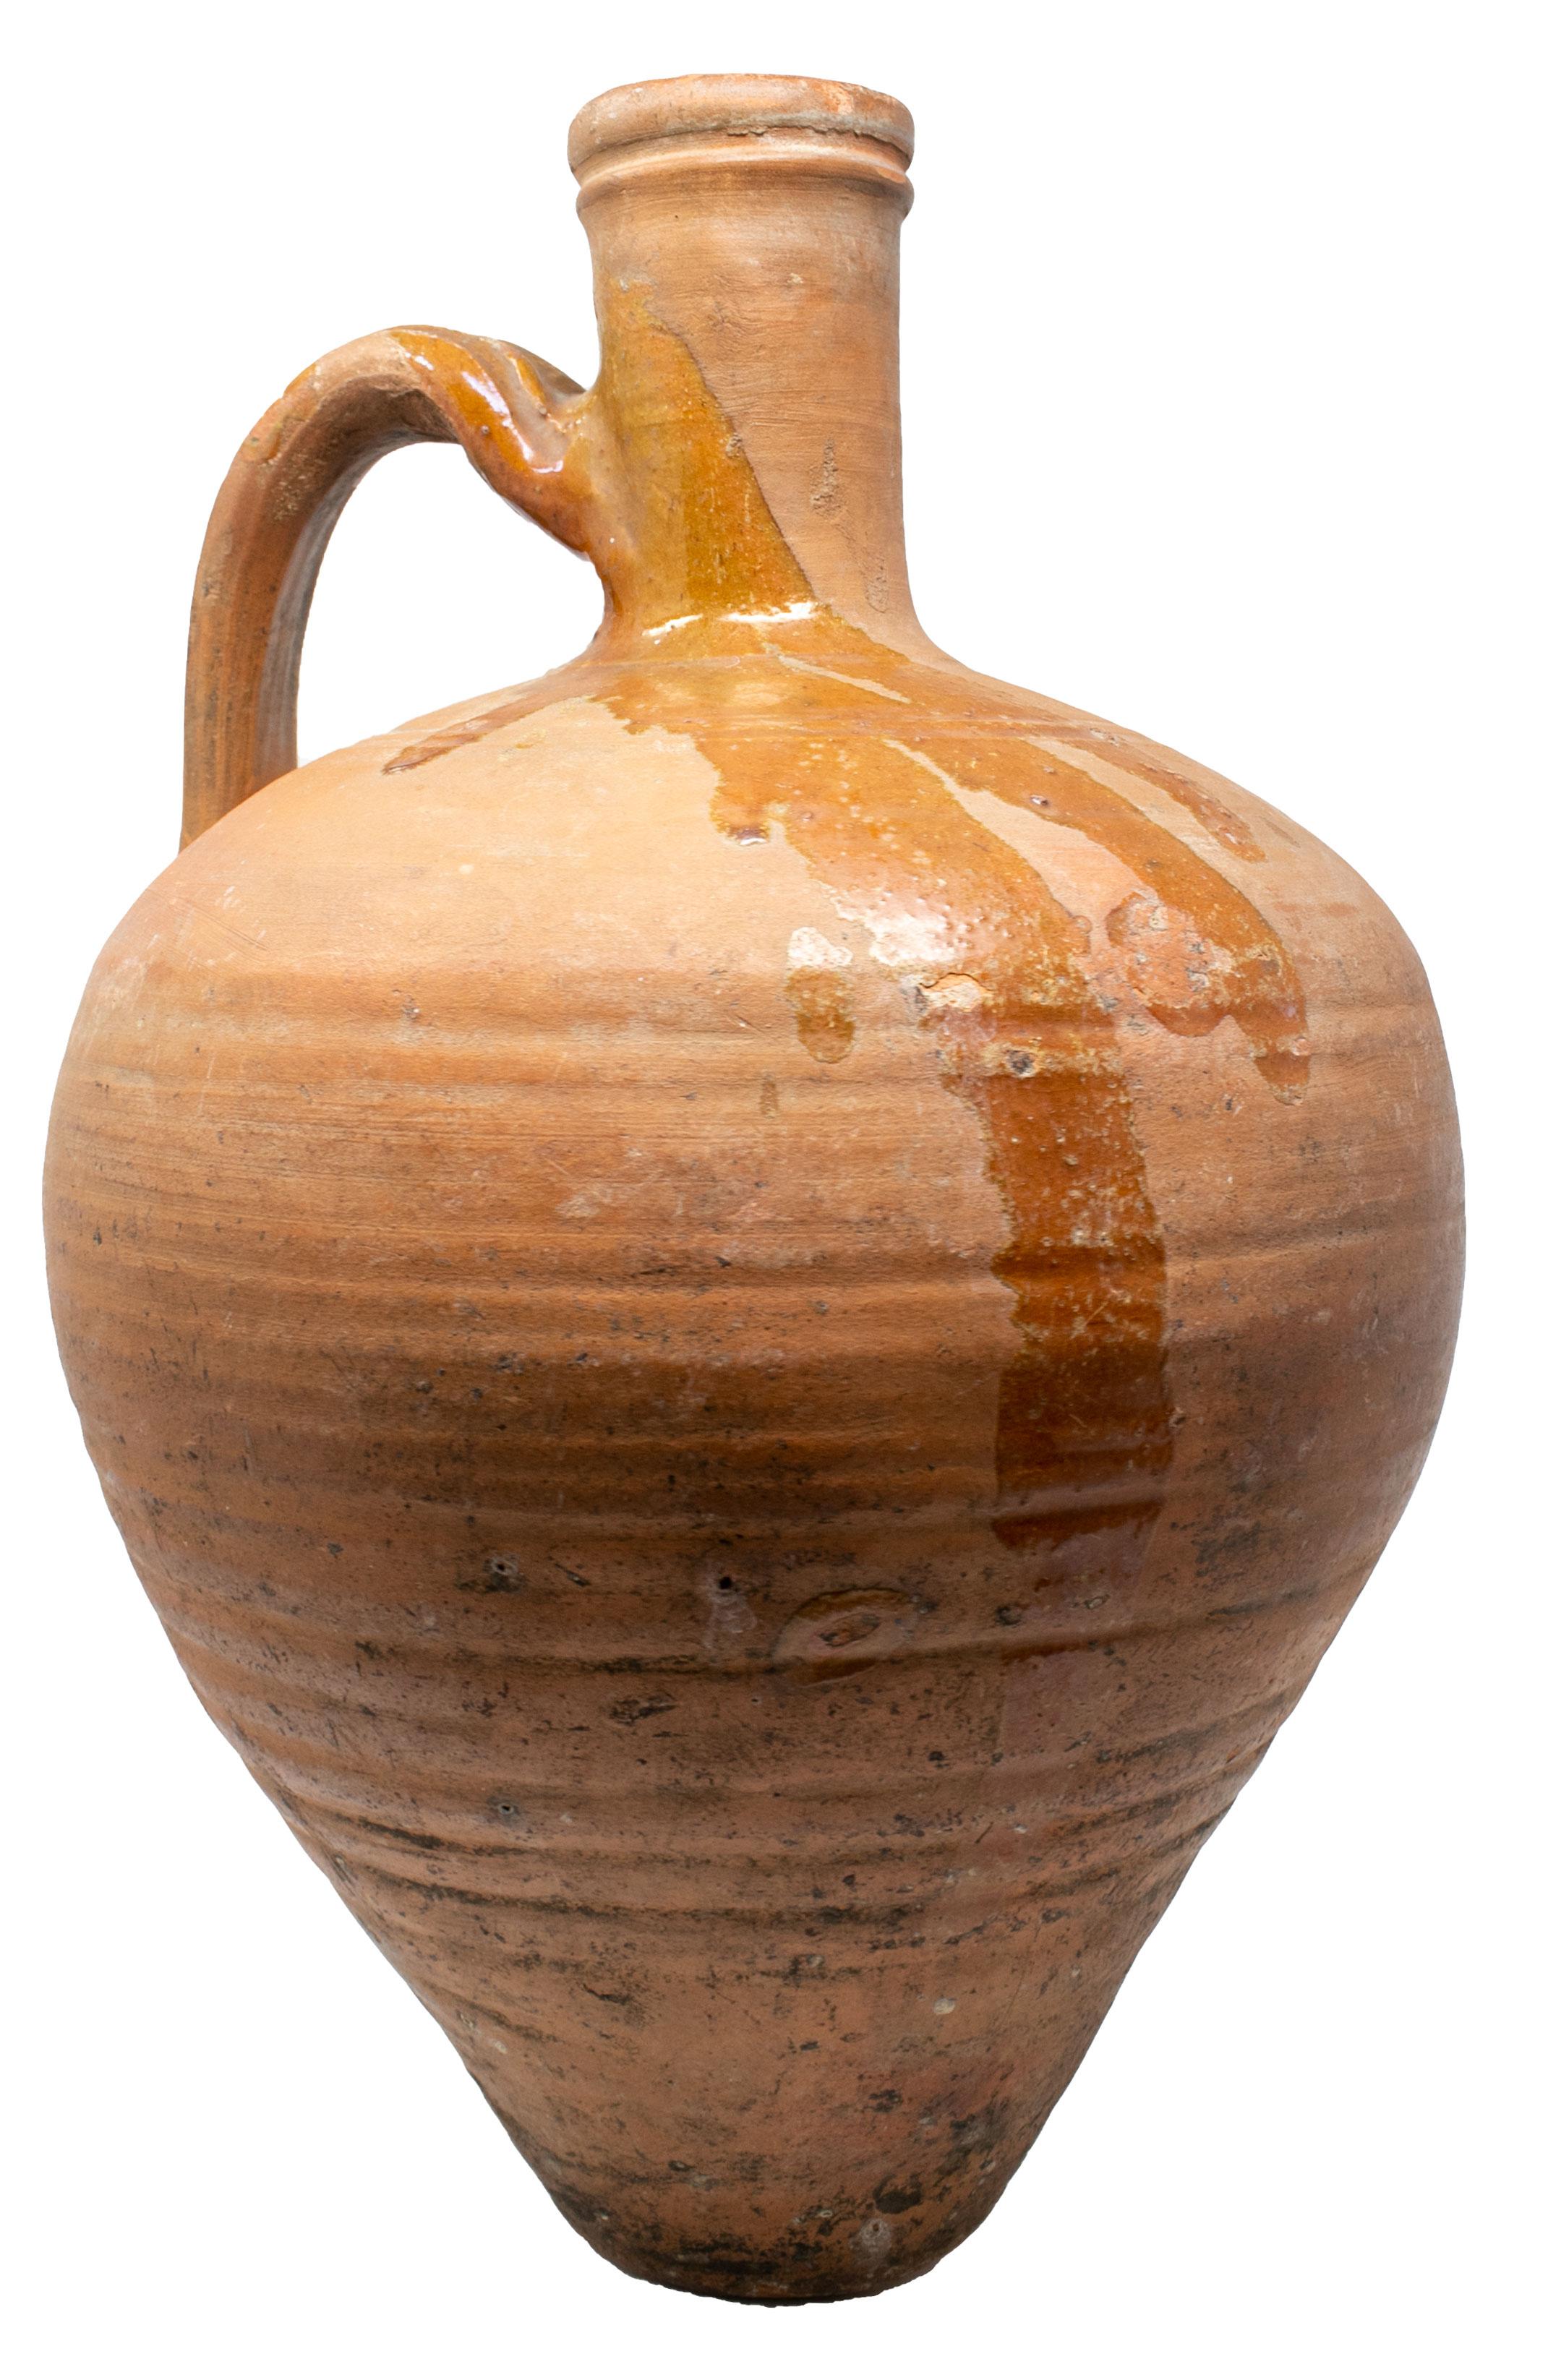 1950s Spanish Andalusian handmade terracotta vase splashed with brown glazing.